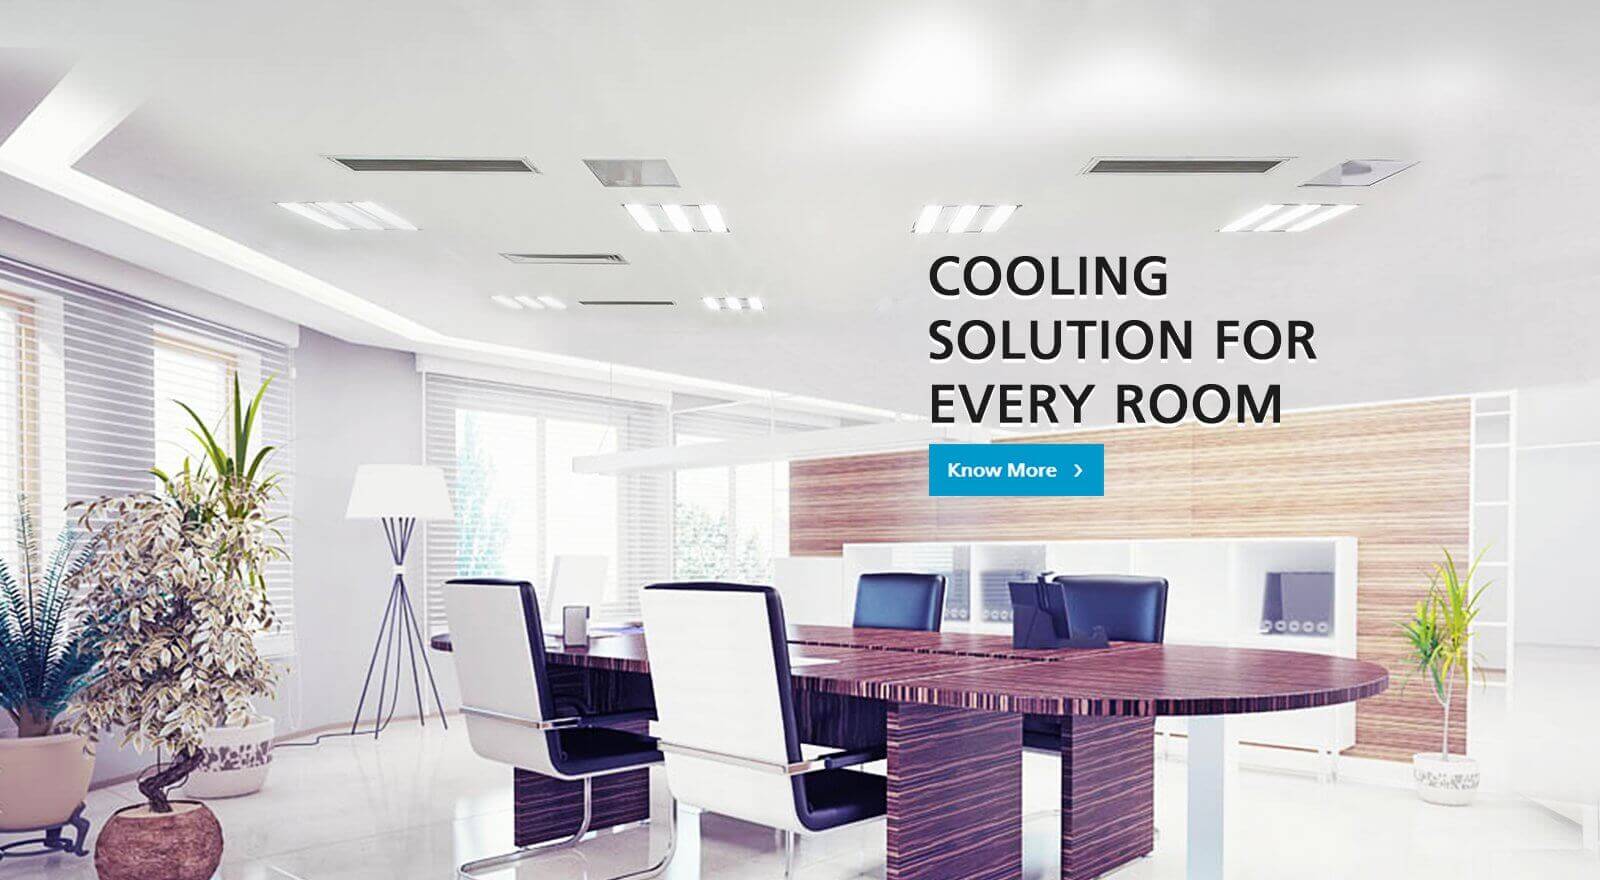 Cooling Solution for every room